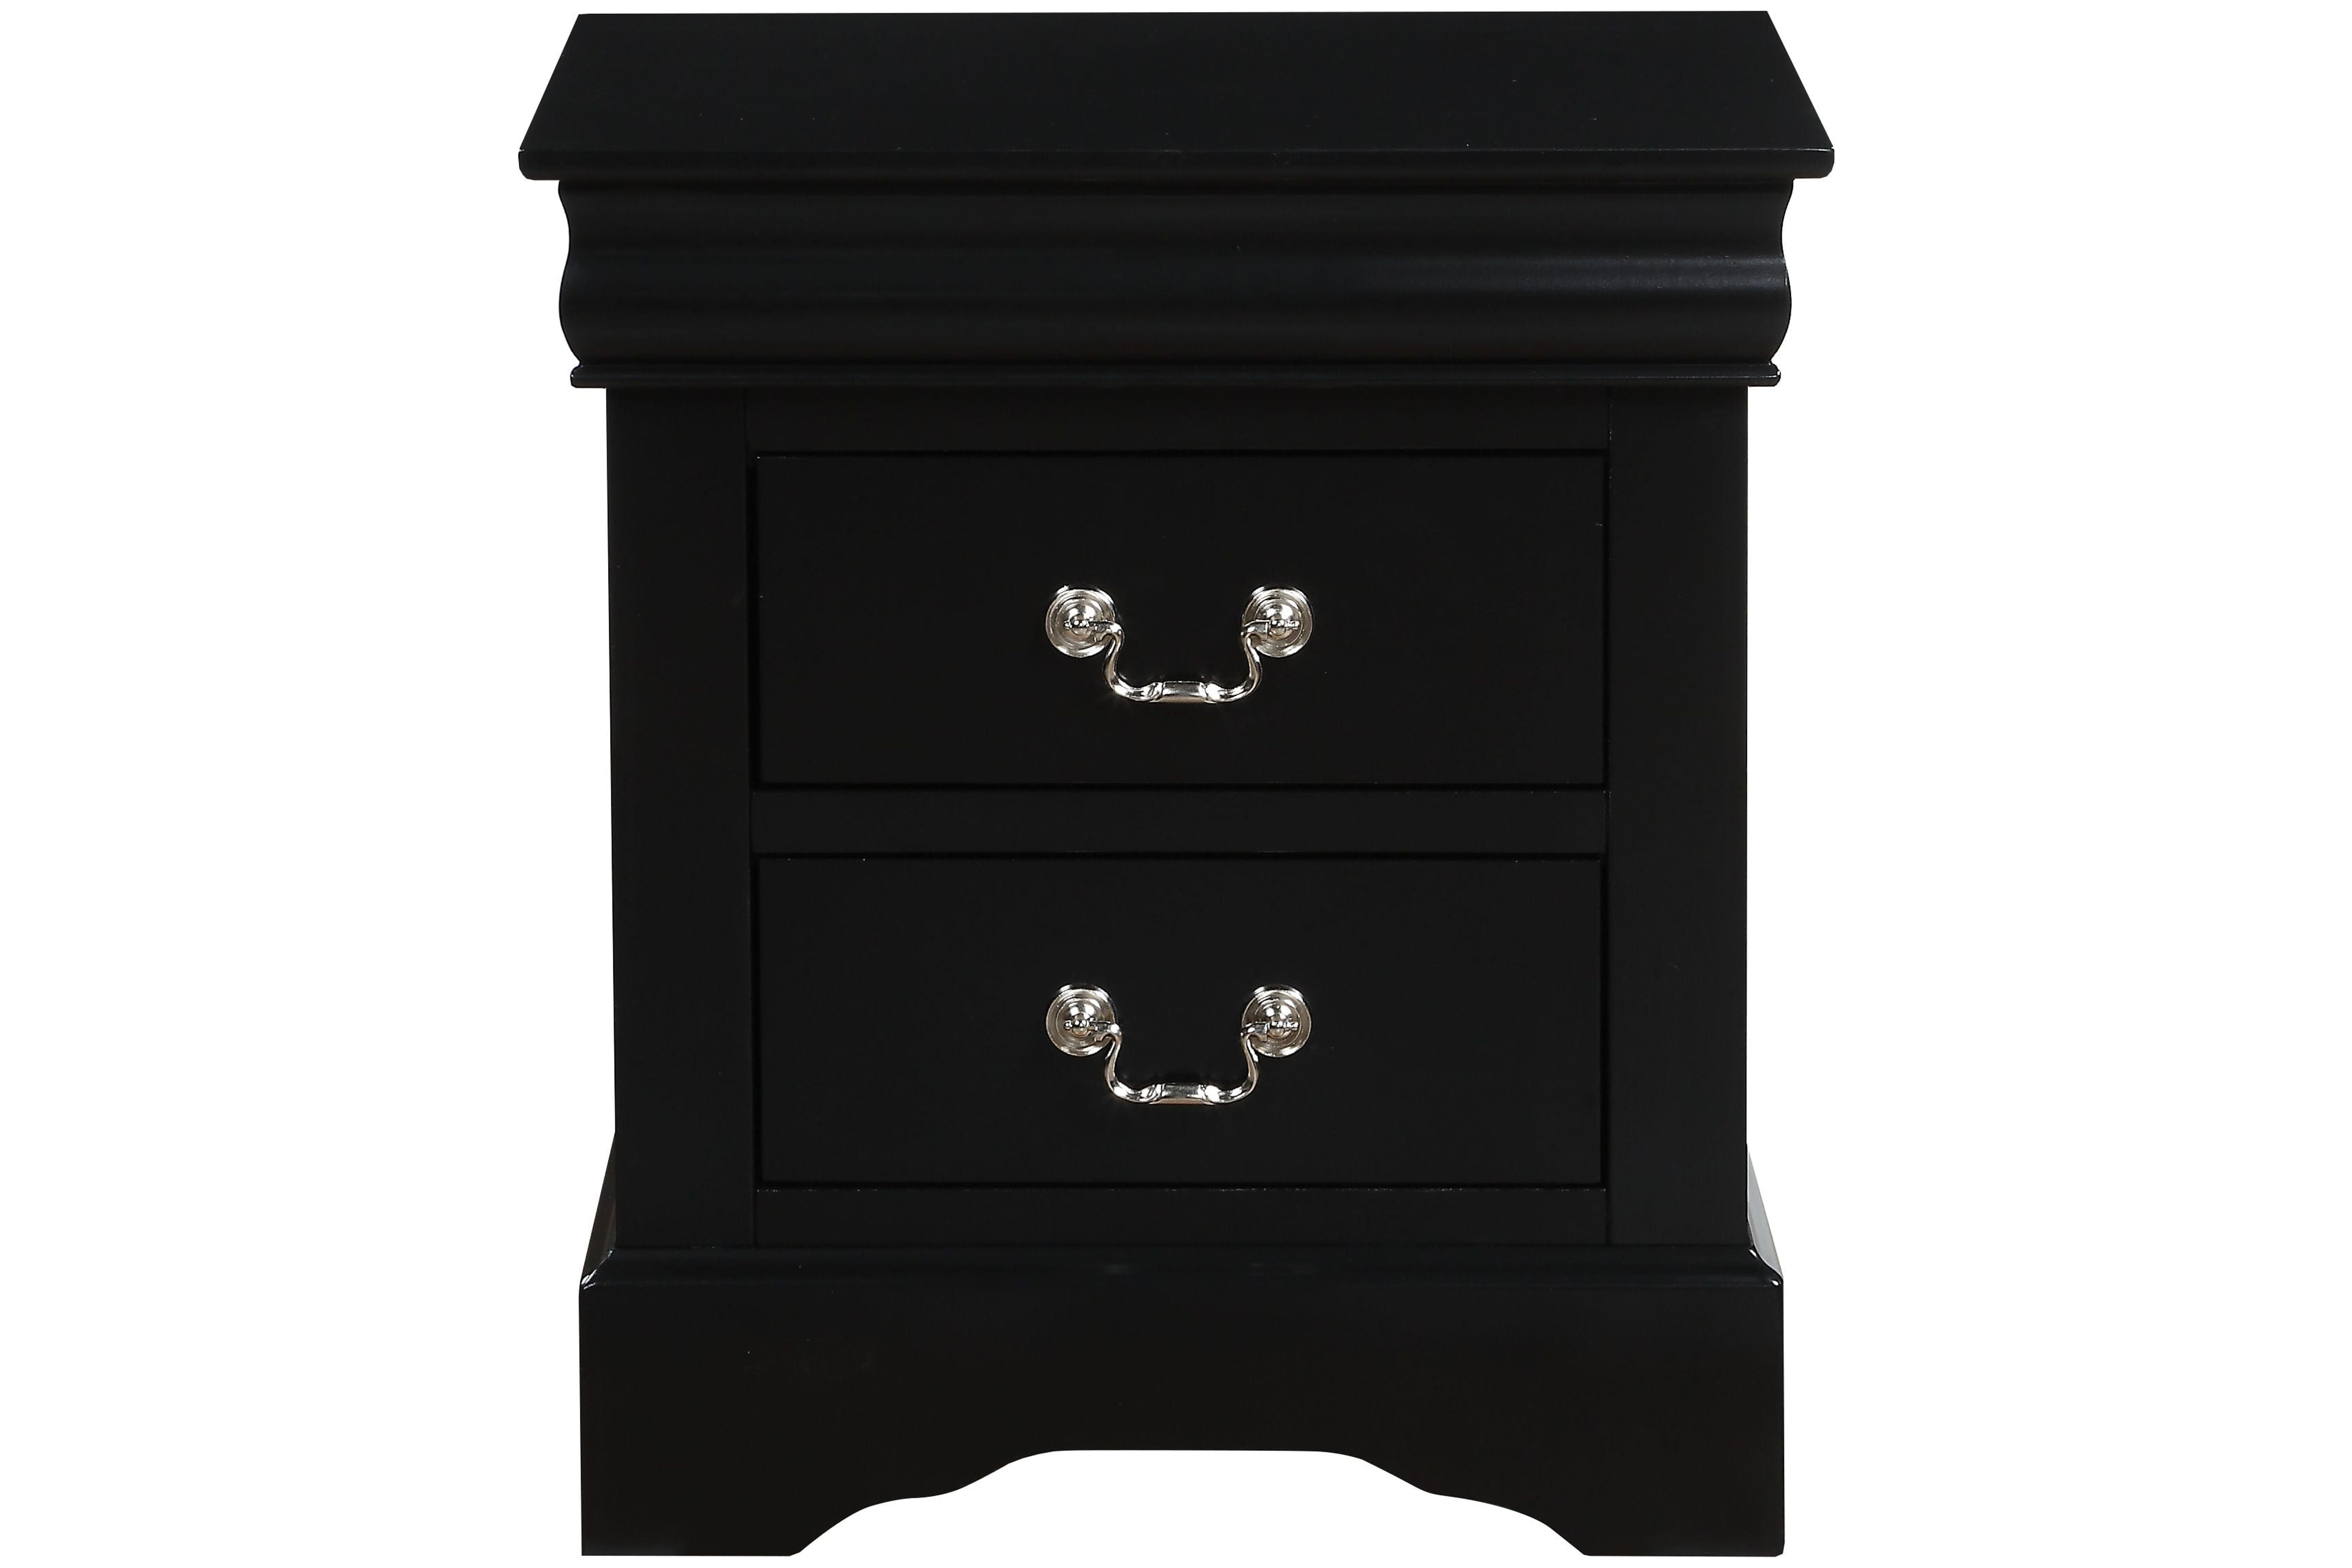 Acme Furniture Nightstands Louis Philippe III 19523 Nightstand (2 Drawers)  from Furniture Place LLC